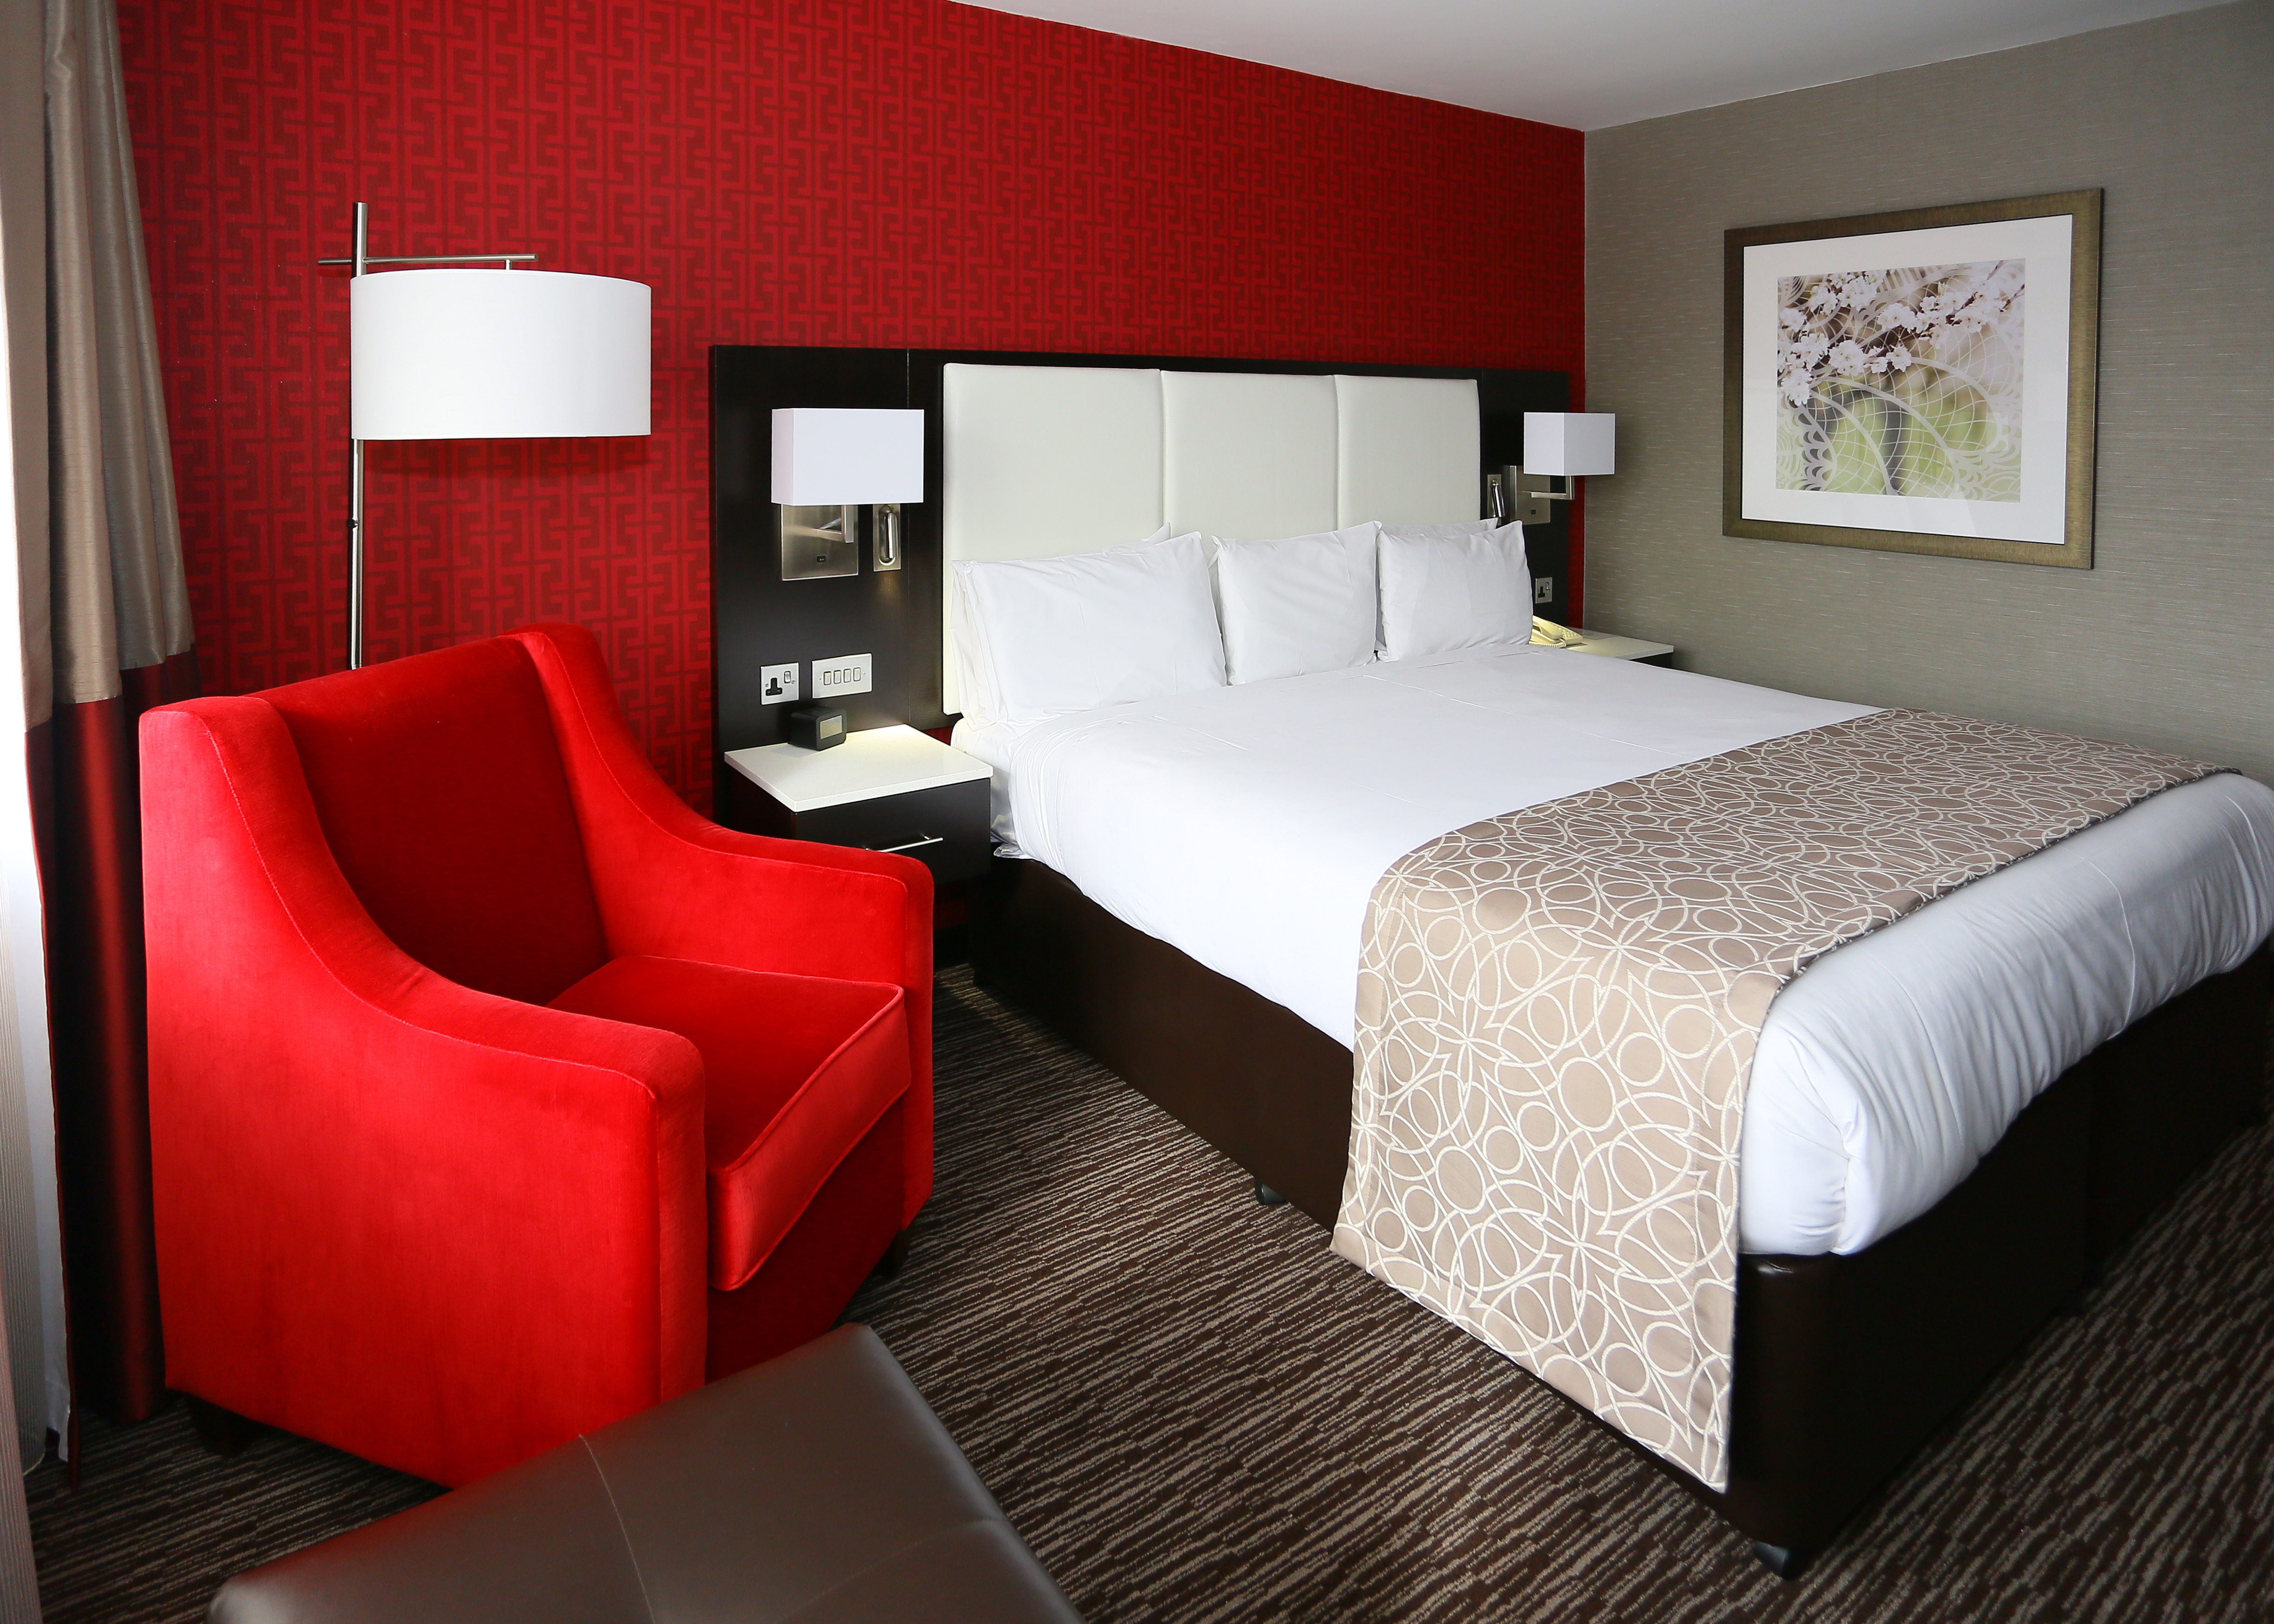 Red Srmchair, Floor Lamp, Lamps Above Bedside Tables, King Bed and Wall Art in Guest Room